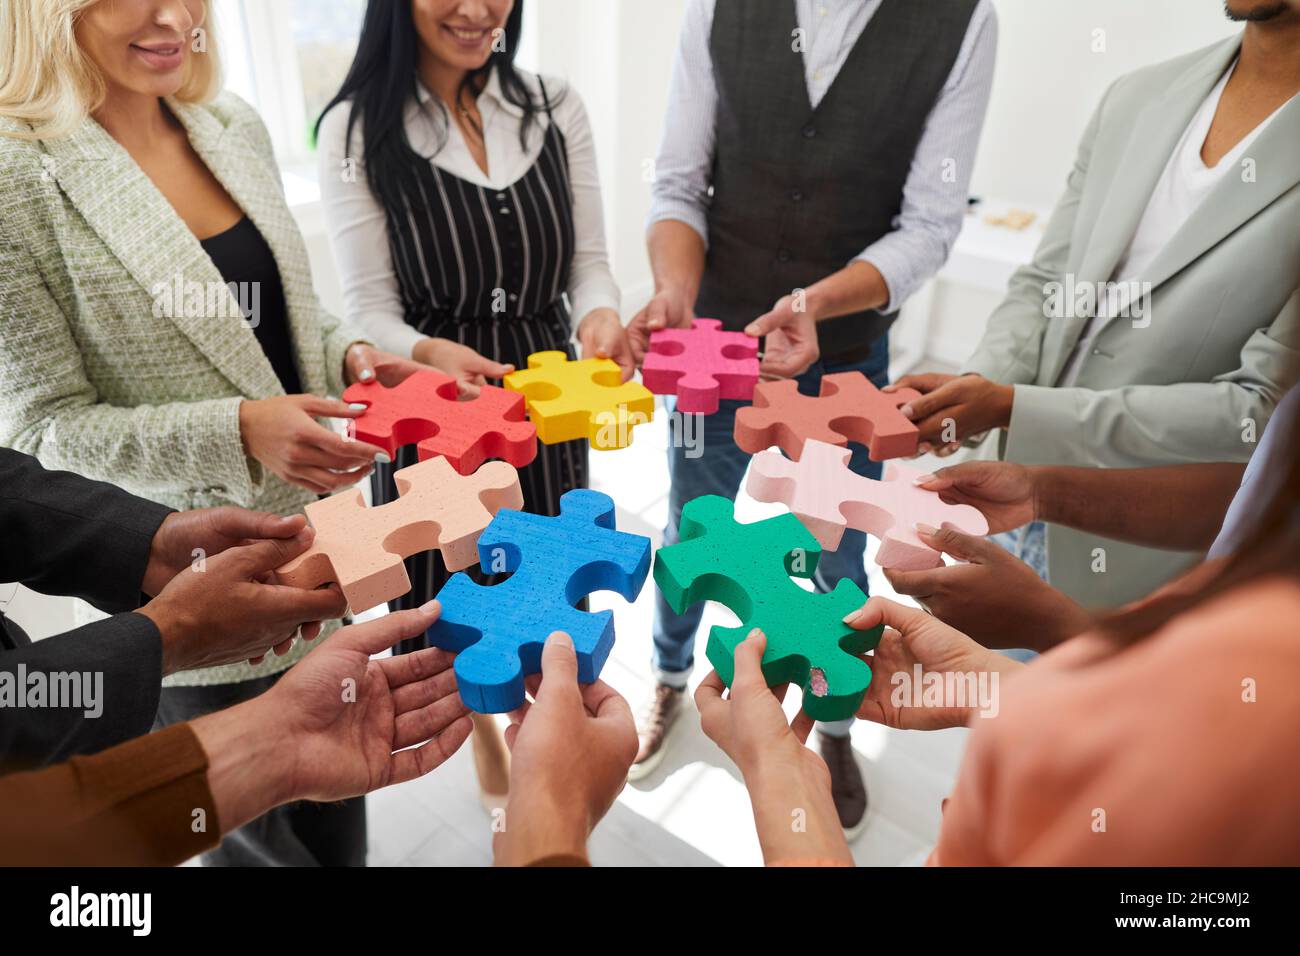 Diverse business people who value teamwork and creative ideas working as one team Stock Photo